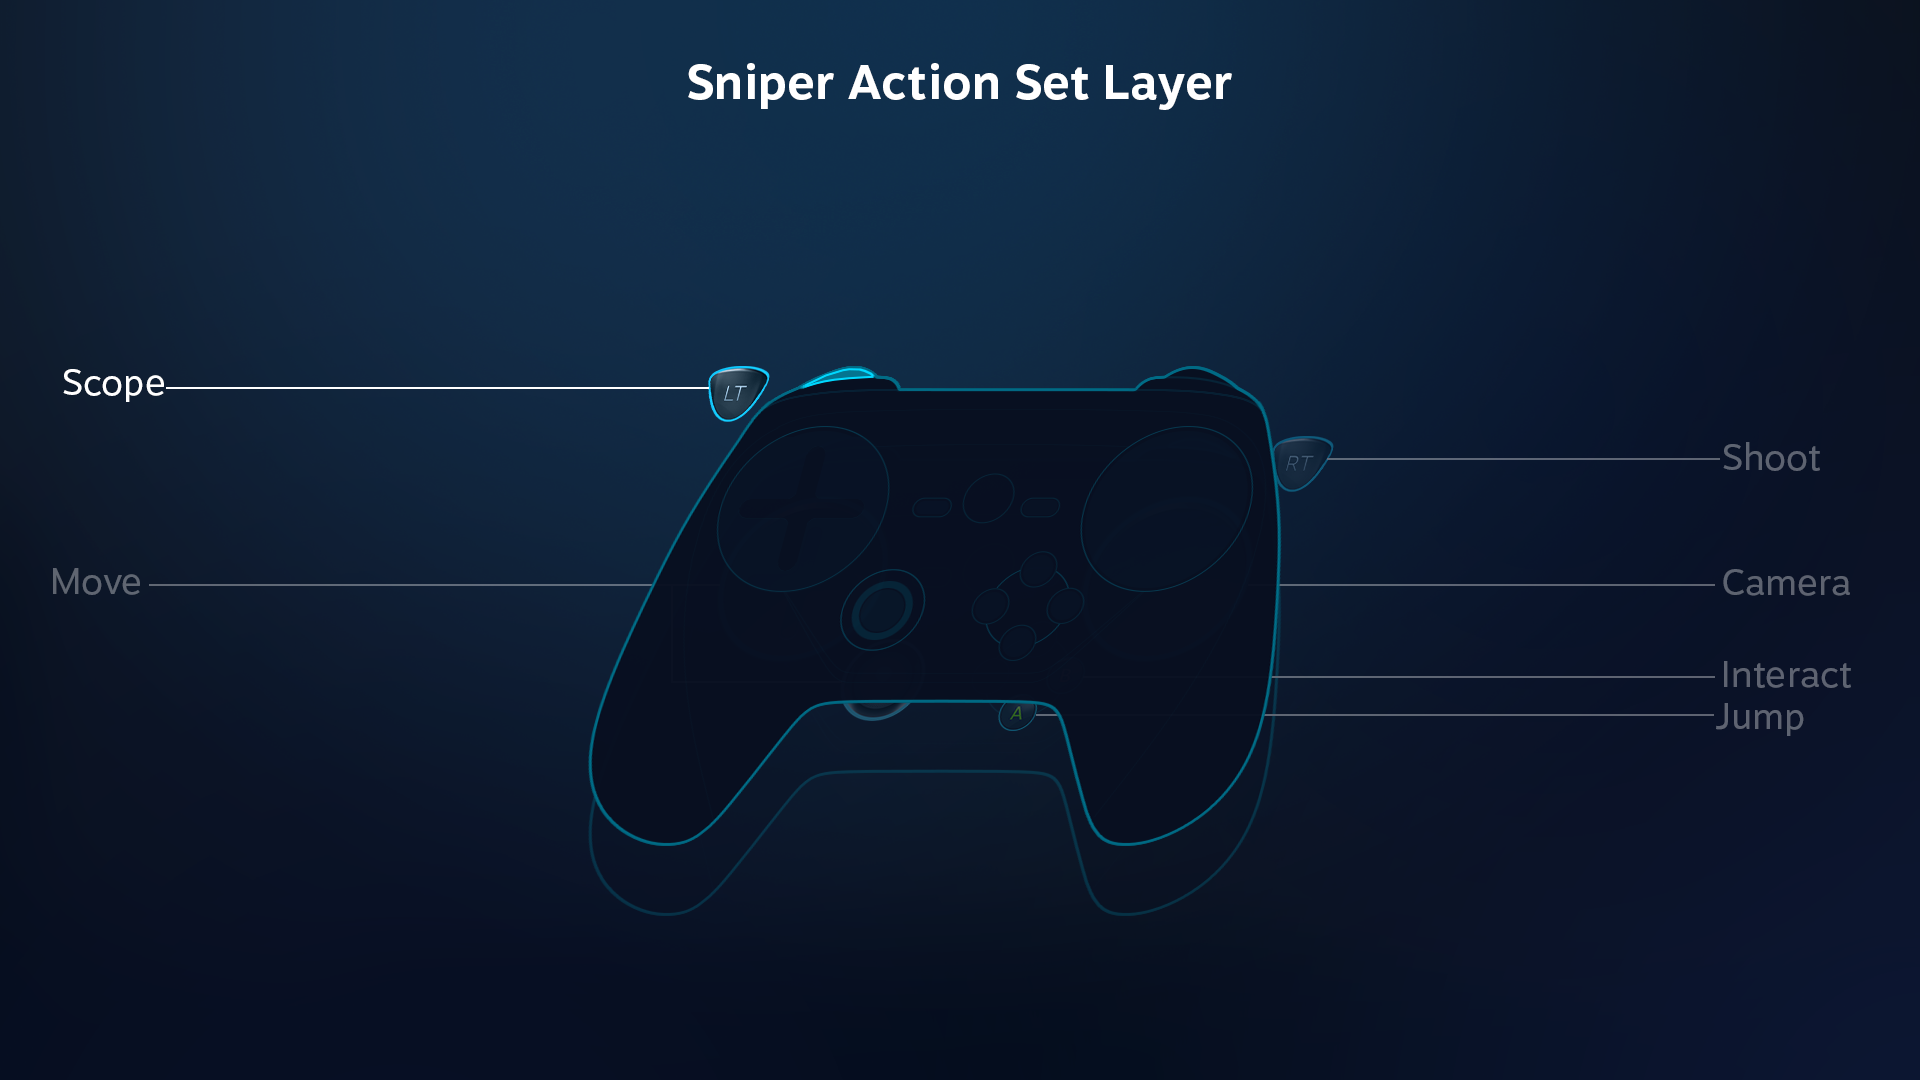 action_set_layers_sniper_2.png